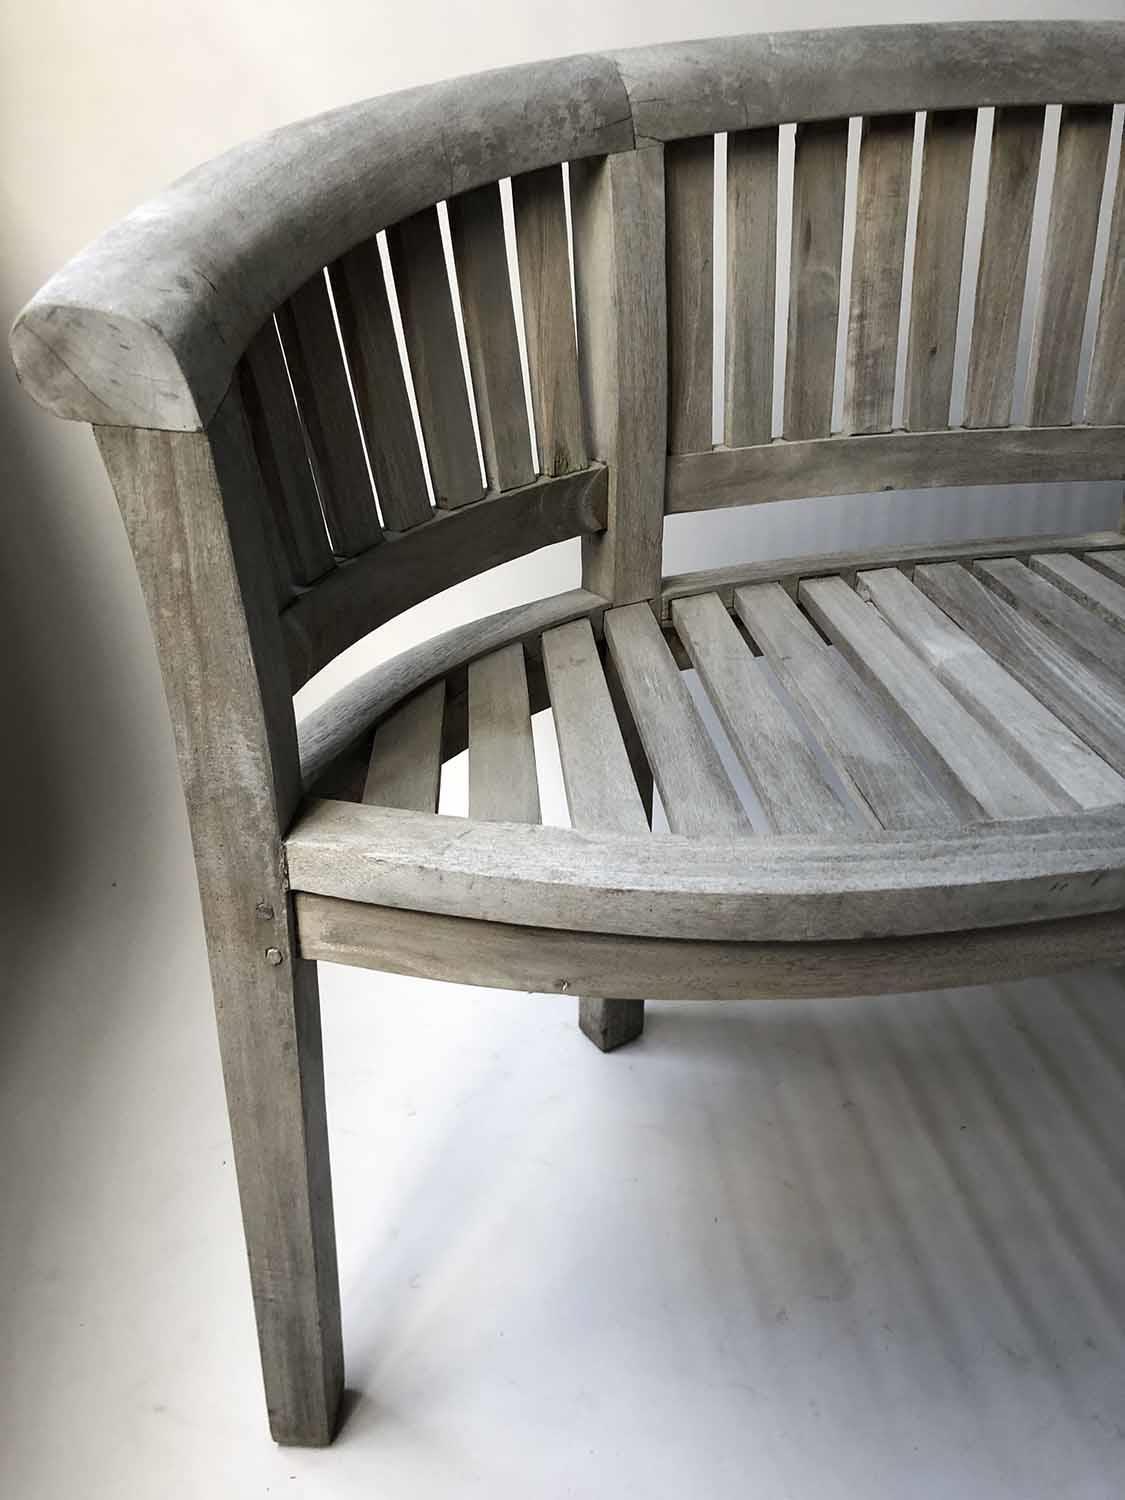 GARDEN BENCH, banana design, silvery weathered teak of bowed form and slatted construction, 160cm W. - Image 3 of 4